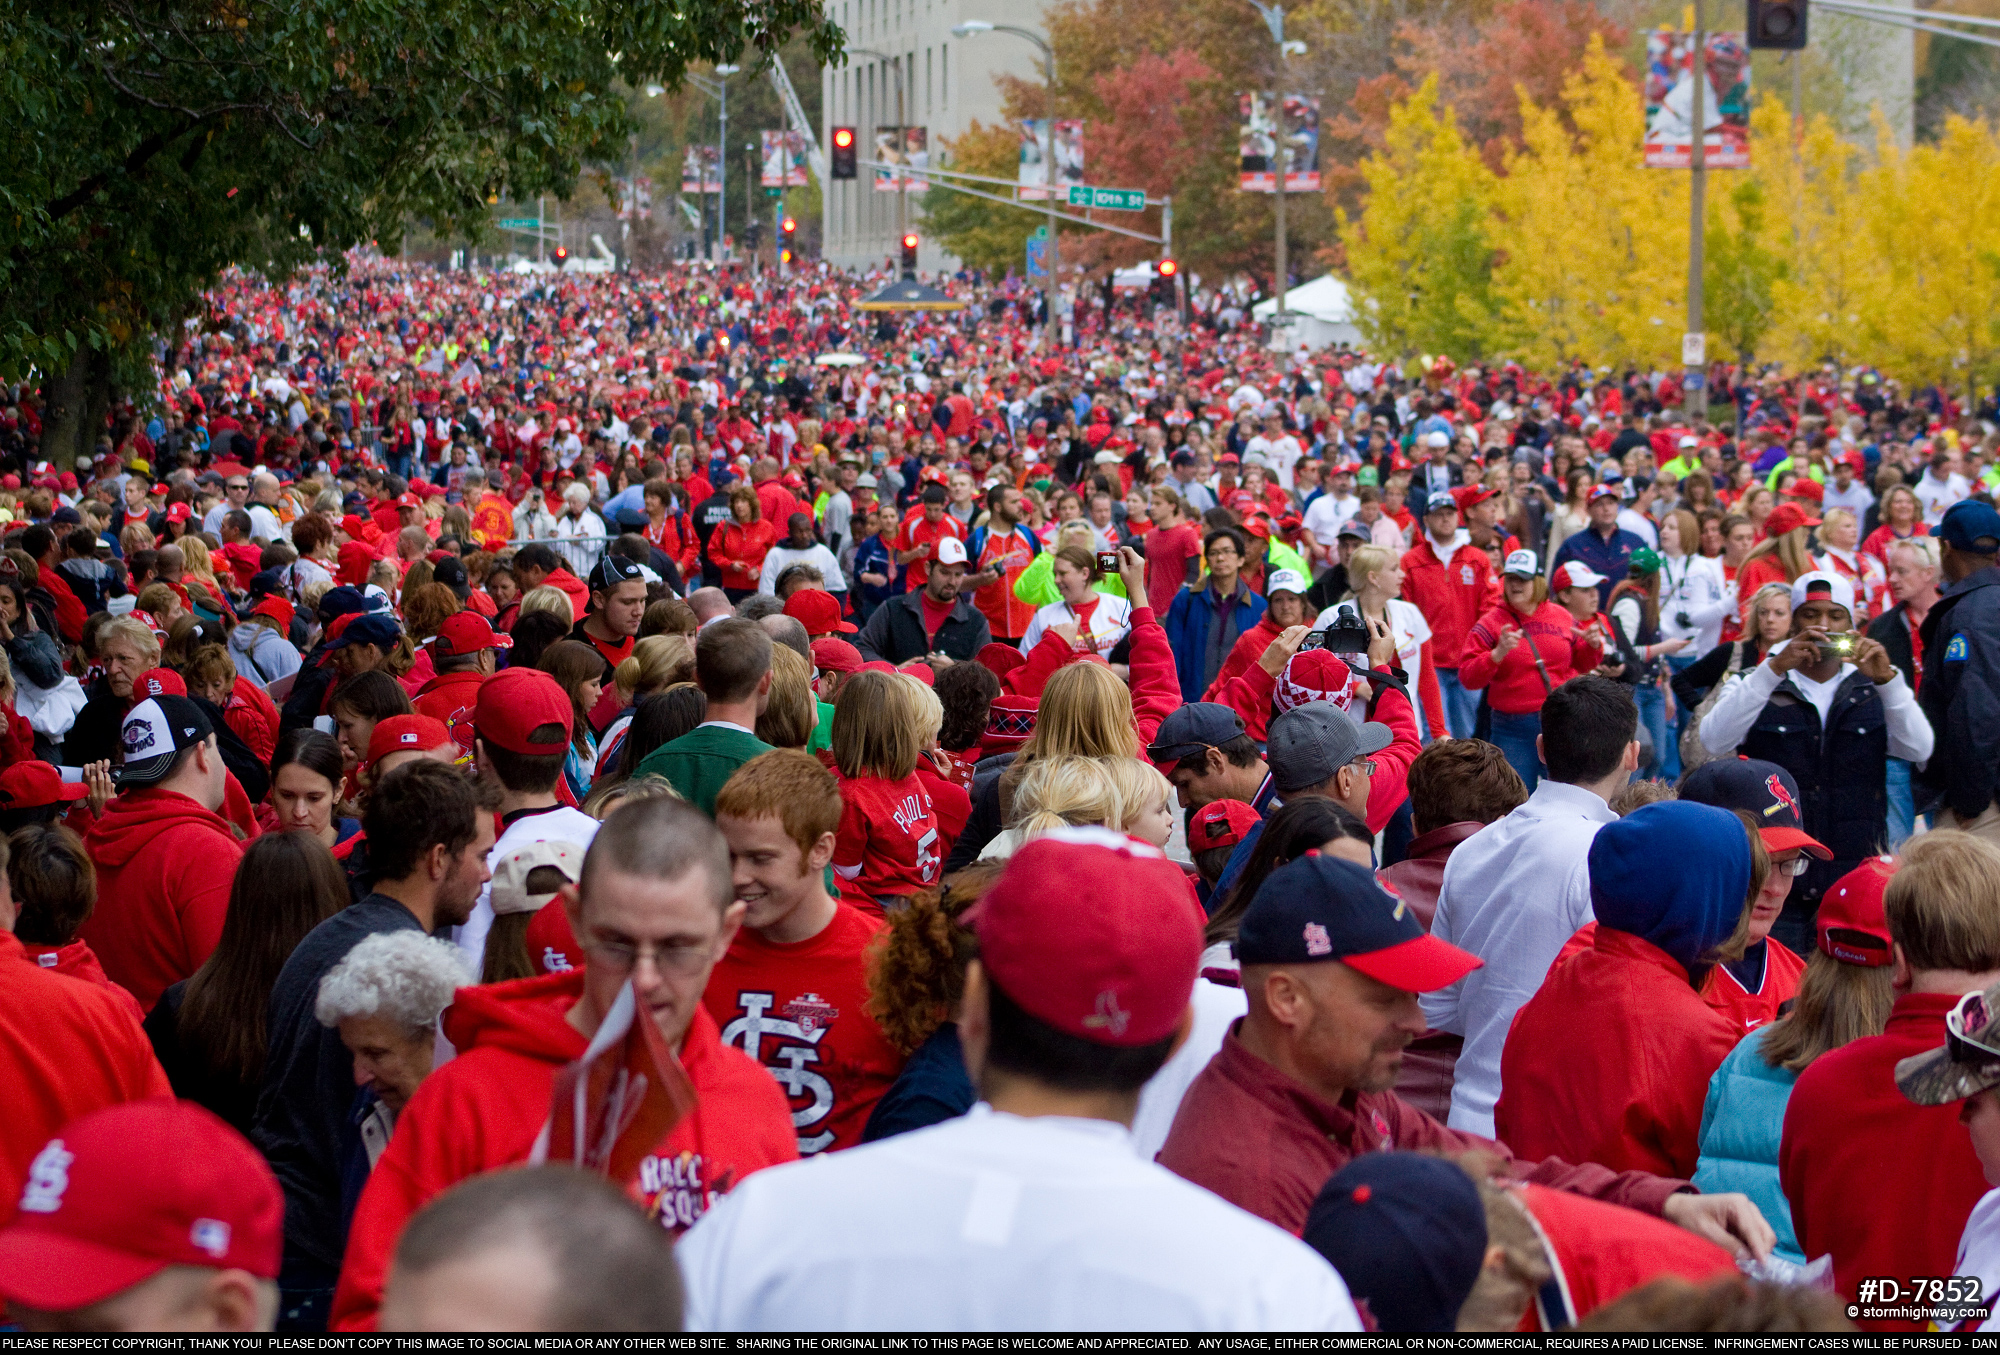 Cardinals fans as far as the eye can see